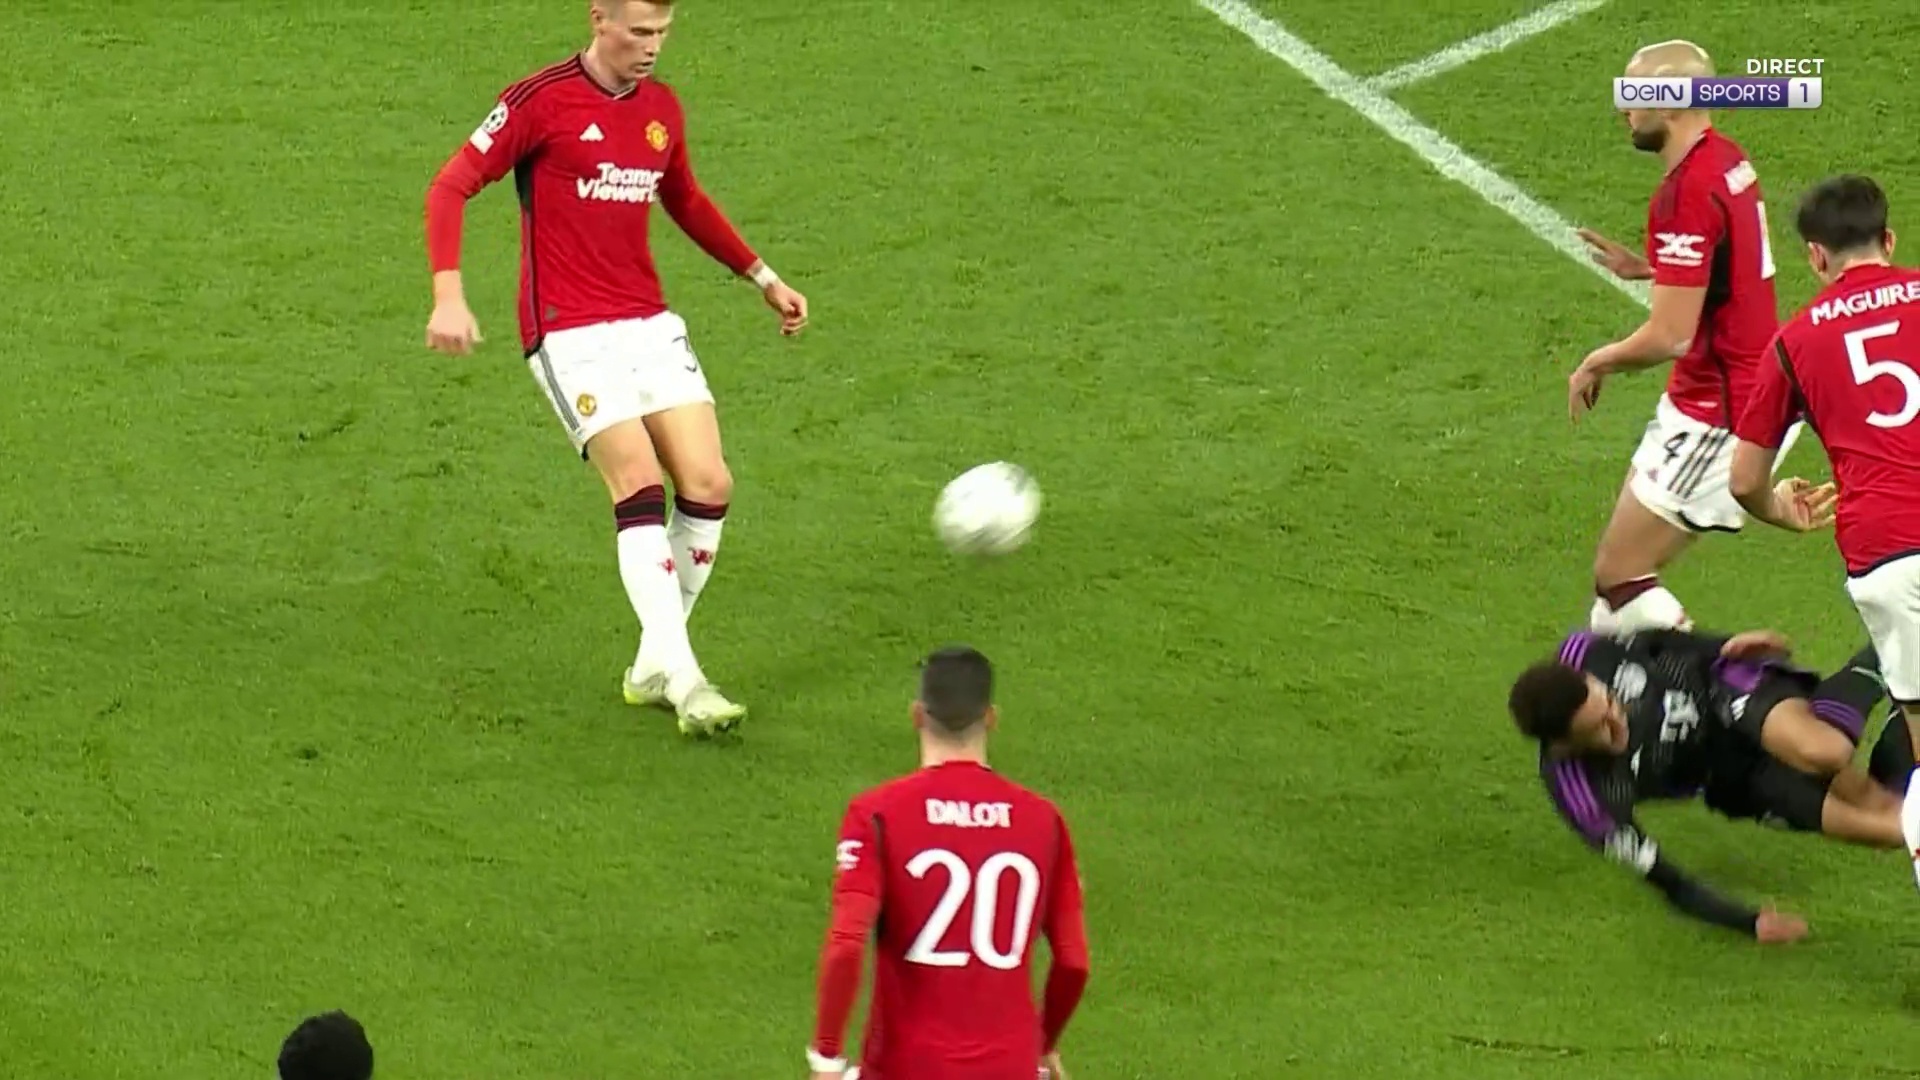 Bayern penalty shout against Manchester United 17'